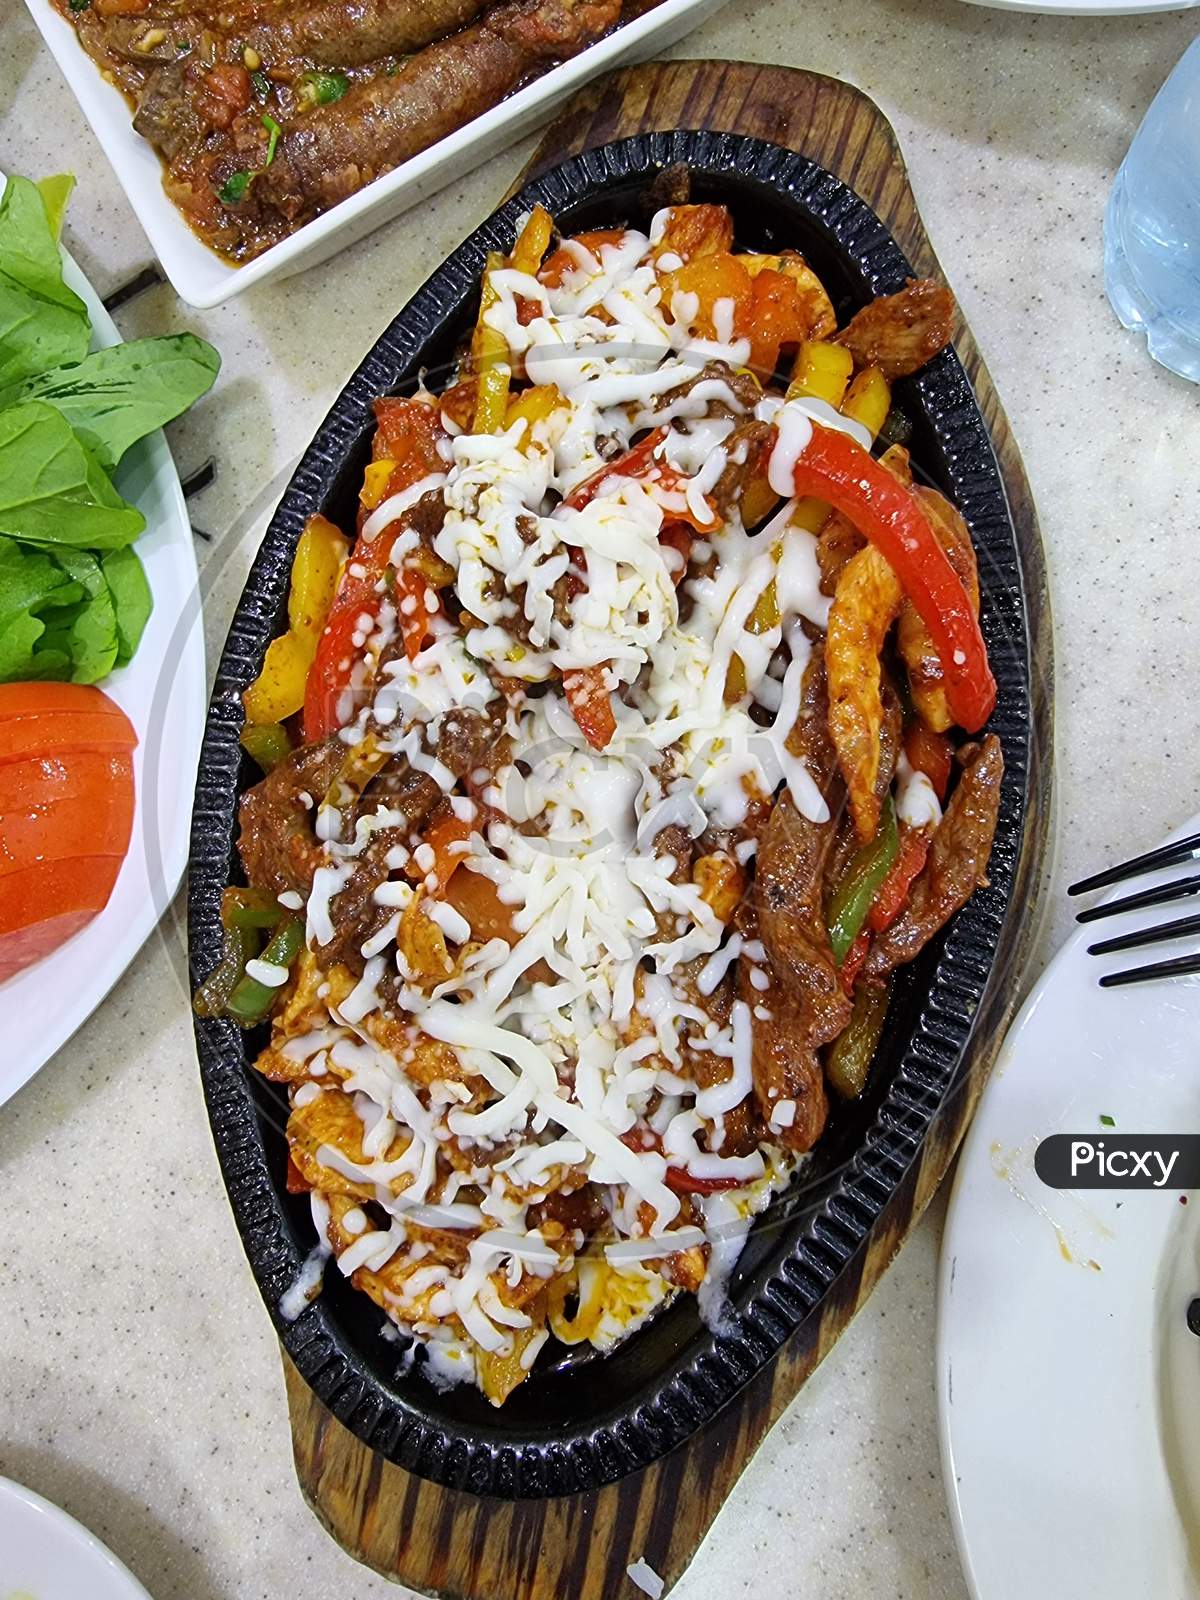 A fajita, in Tex-Mex cuisine, is any stripped grilled meat with stripped peppers and onions that is usually served on a flour or corn tortilla